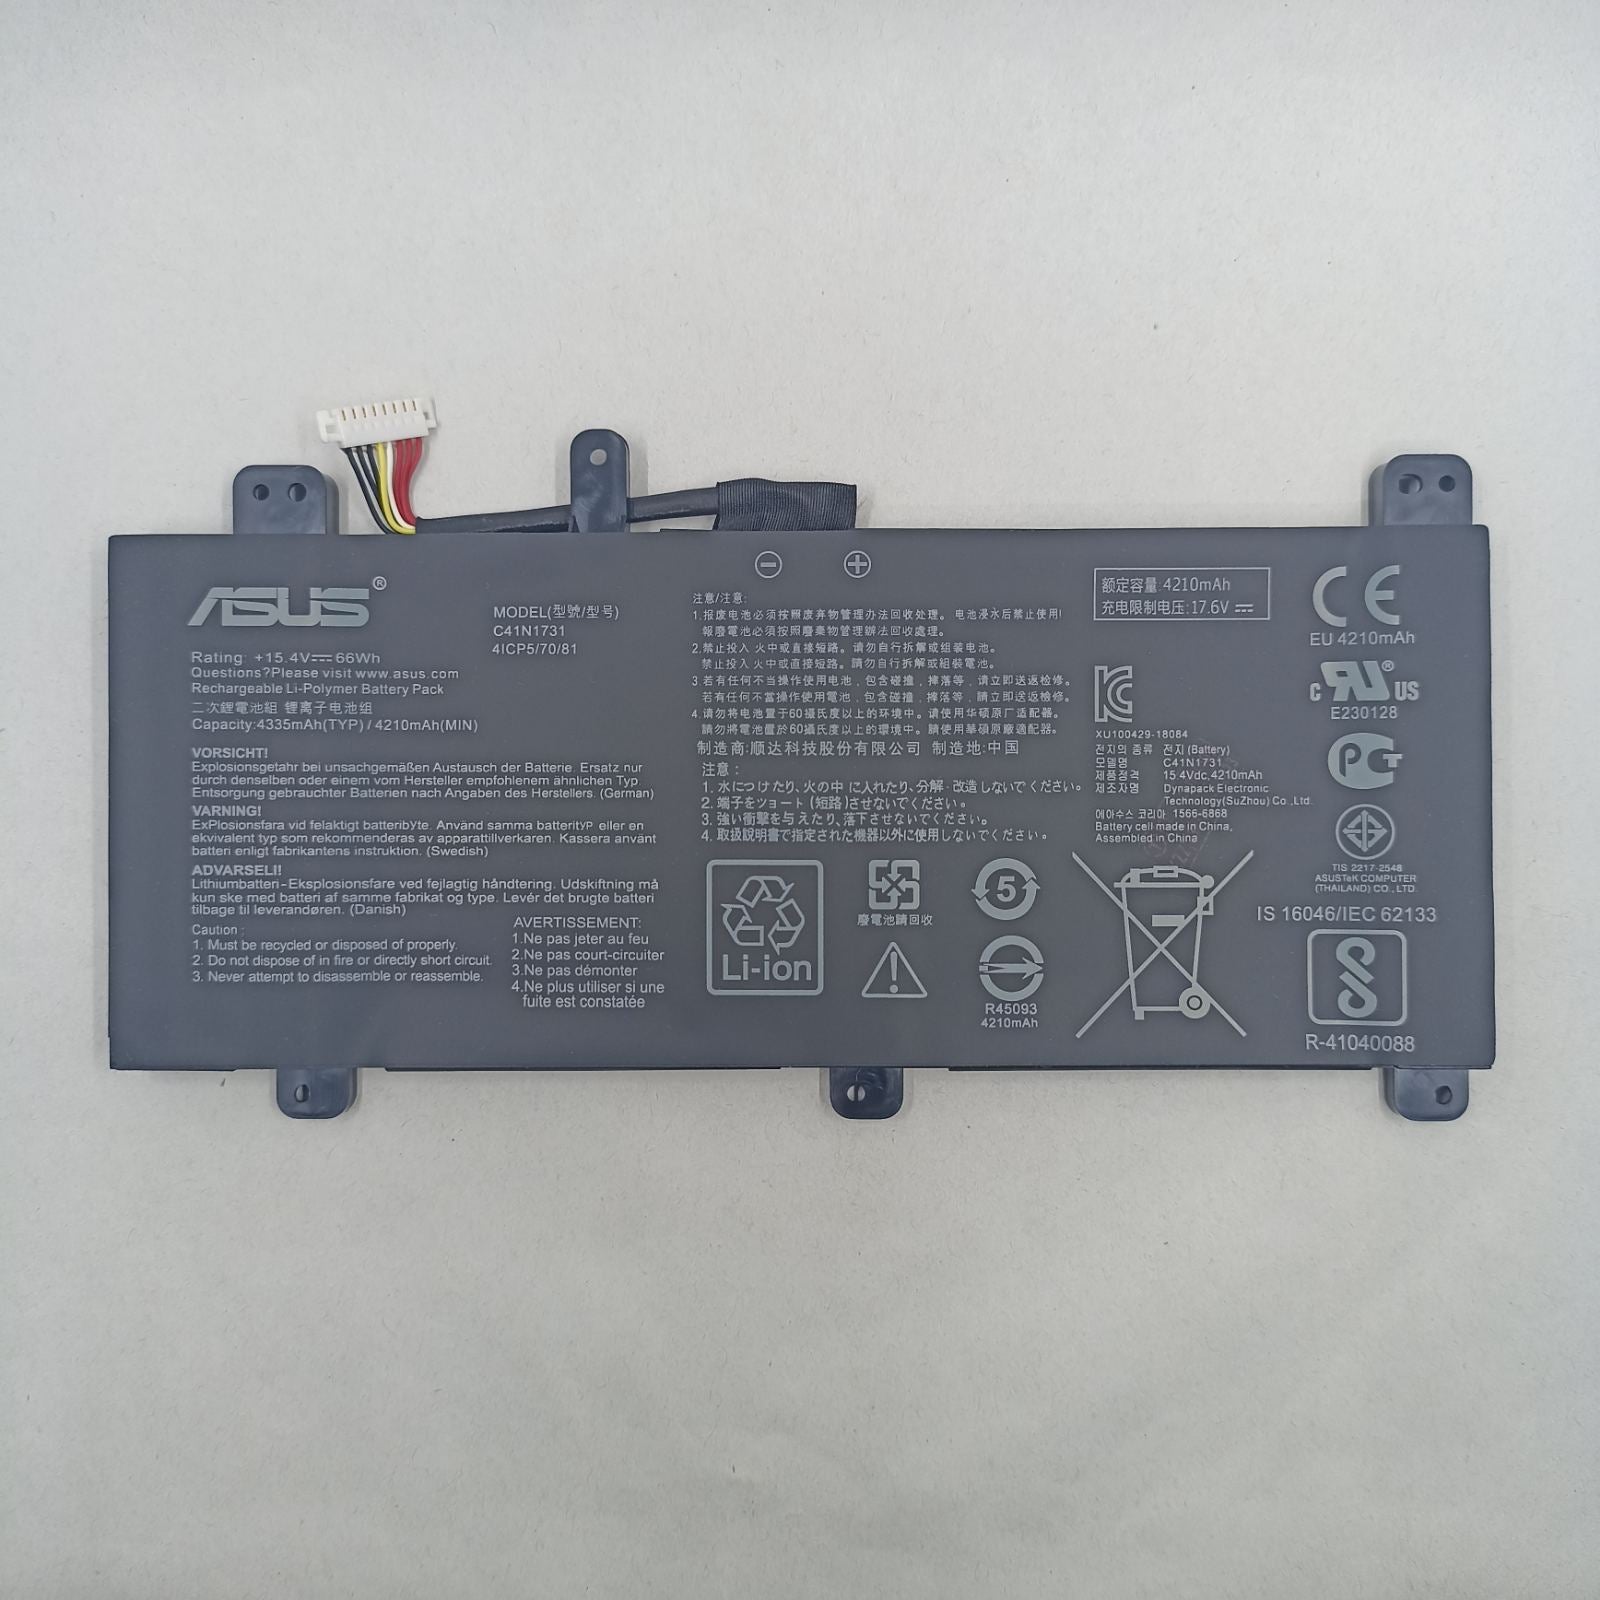 Replacement Battery for Asus GL704GV A1